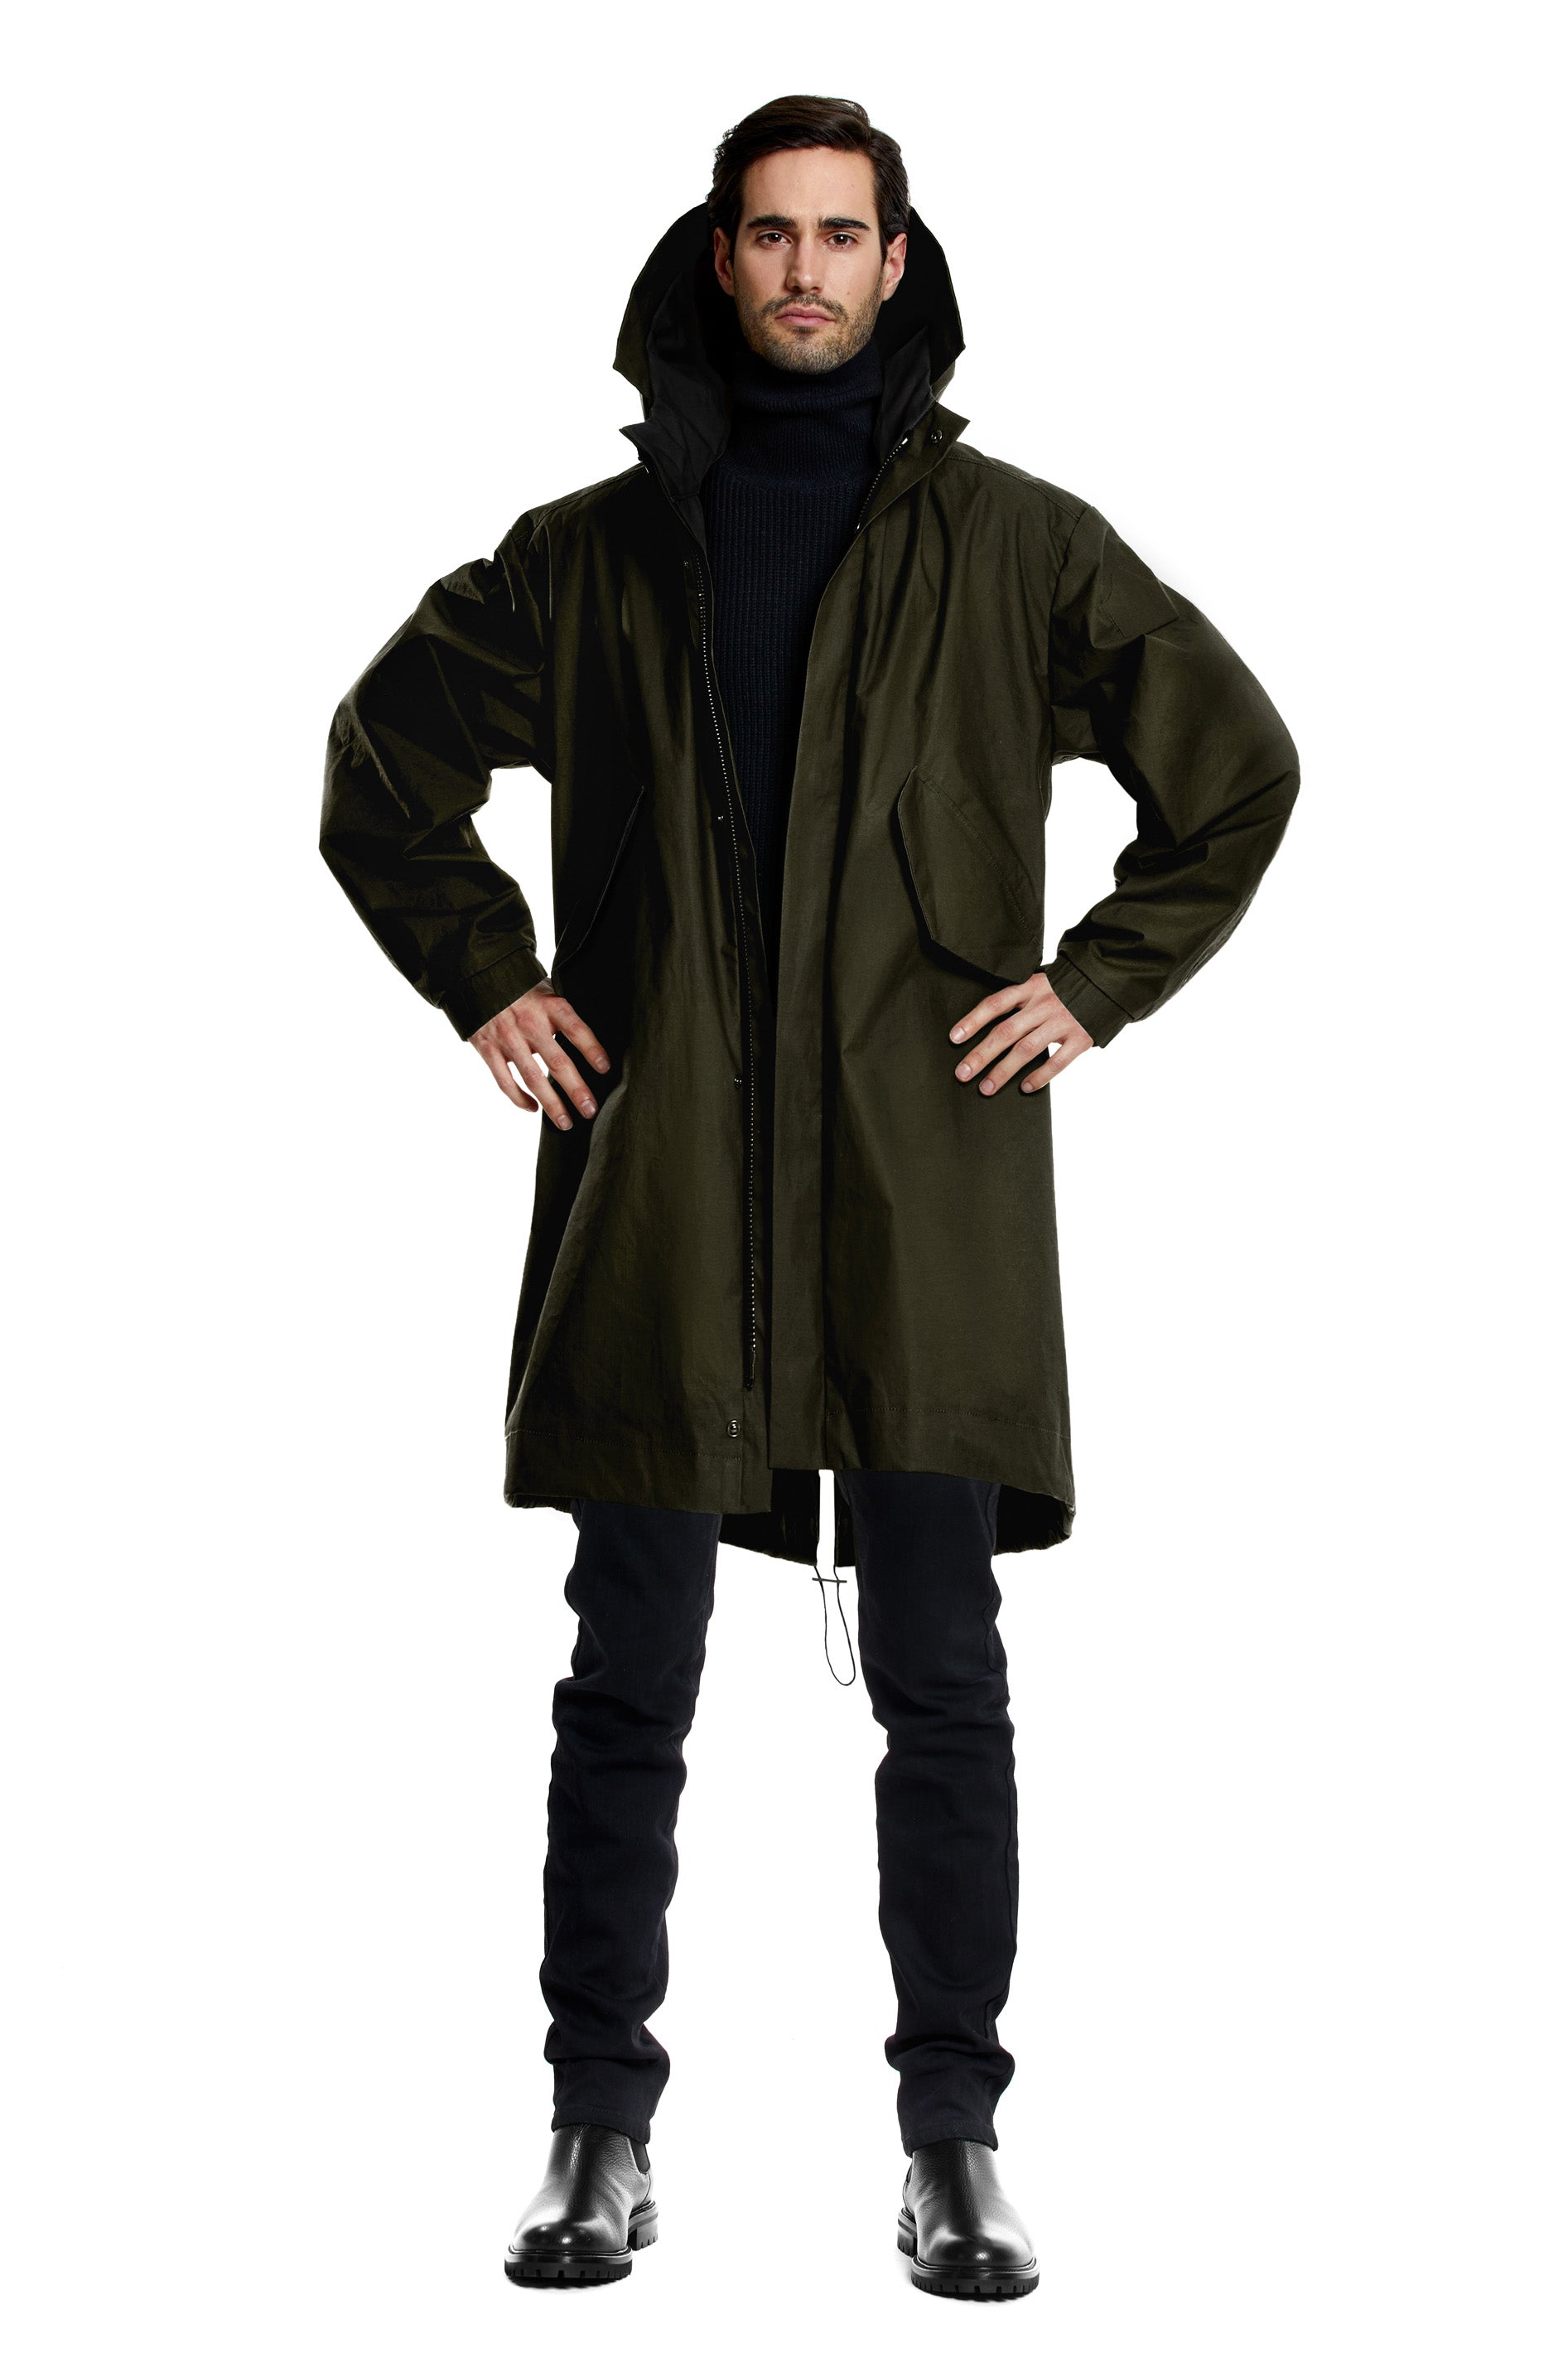 The M65 – Olmsted Outerwear